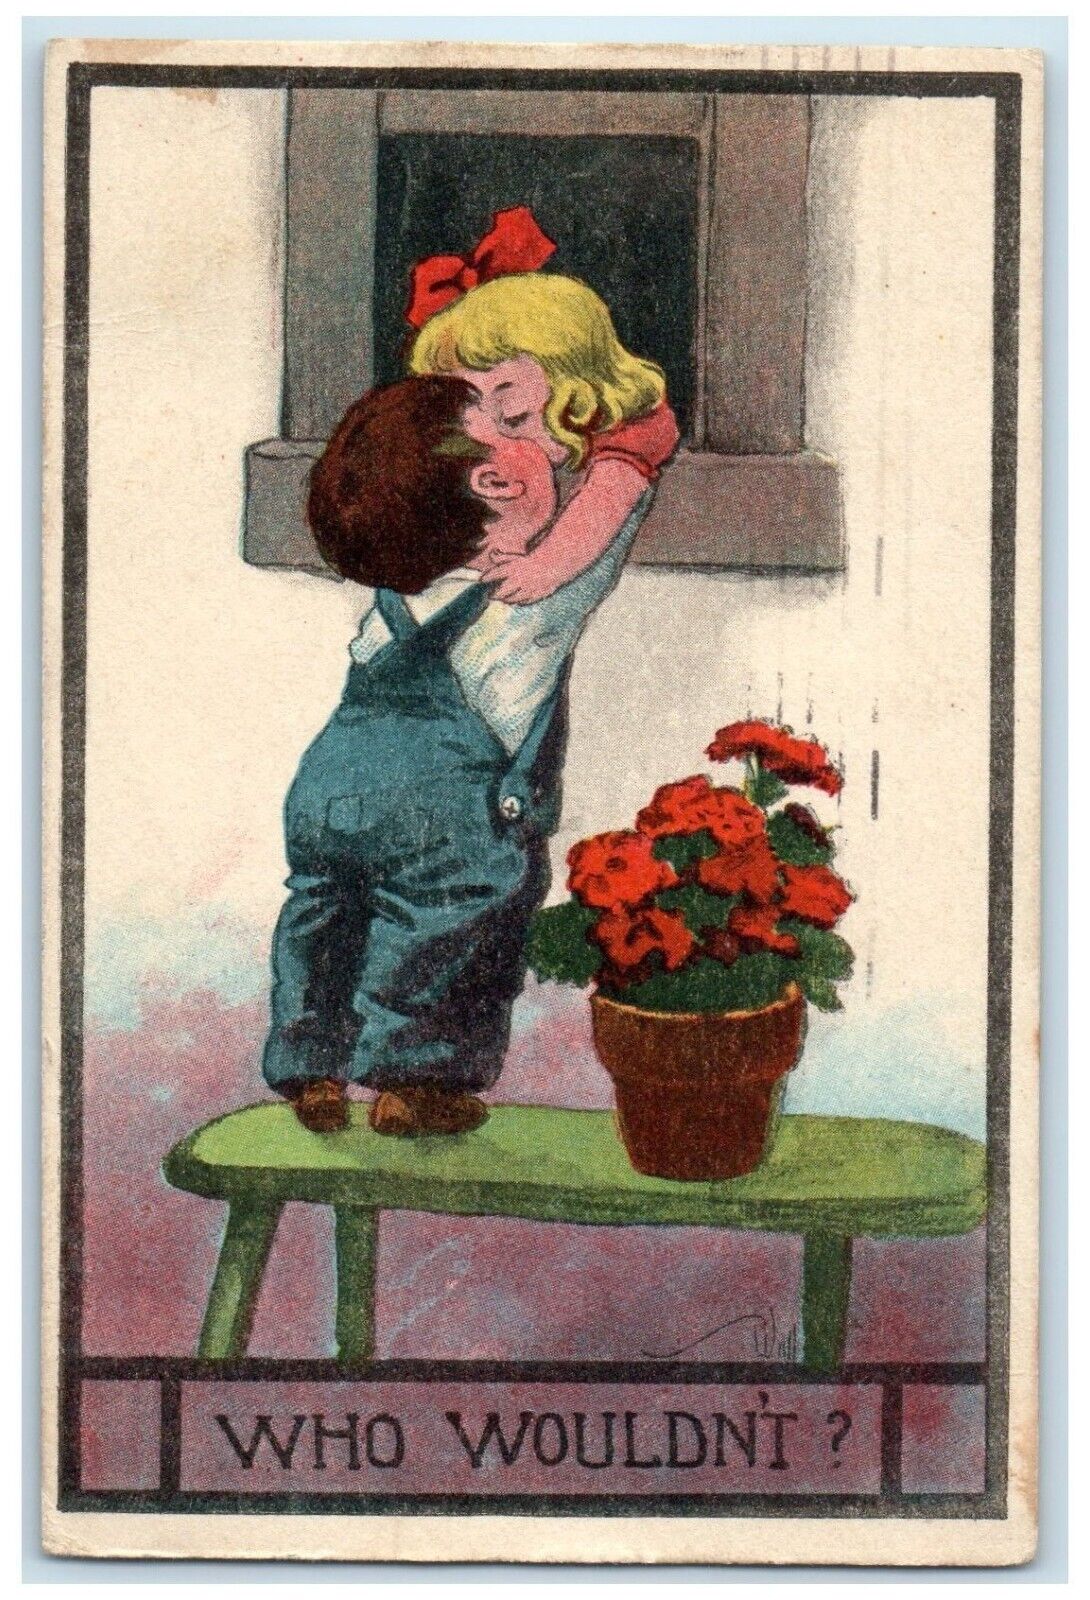 1913 Little Children Kissing On Window Who Wouldn't Chicago IL Antique Postcard